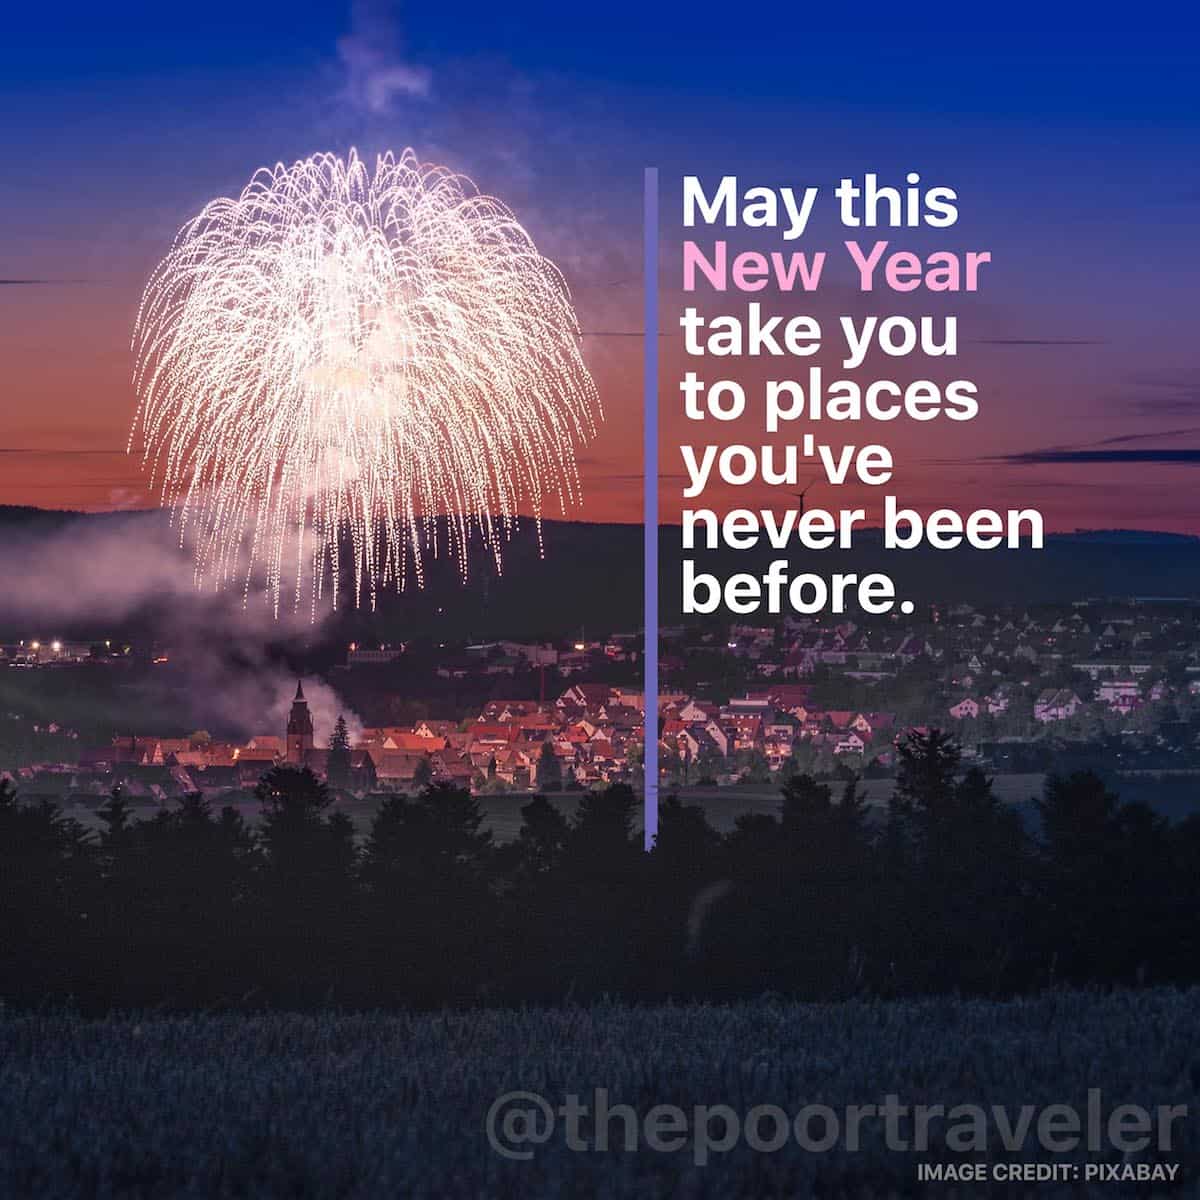 12 New Year Quotes Wishes Greetings For Travelers The Poor Traveler Itinerary Blog